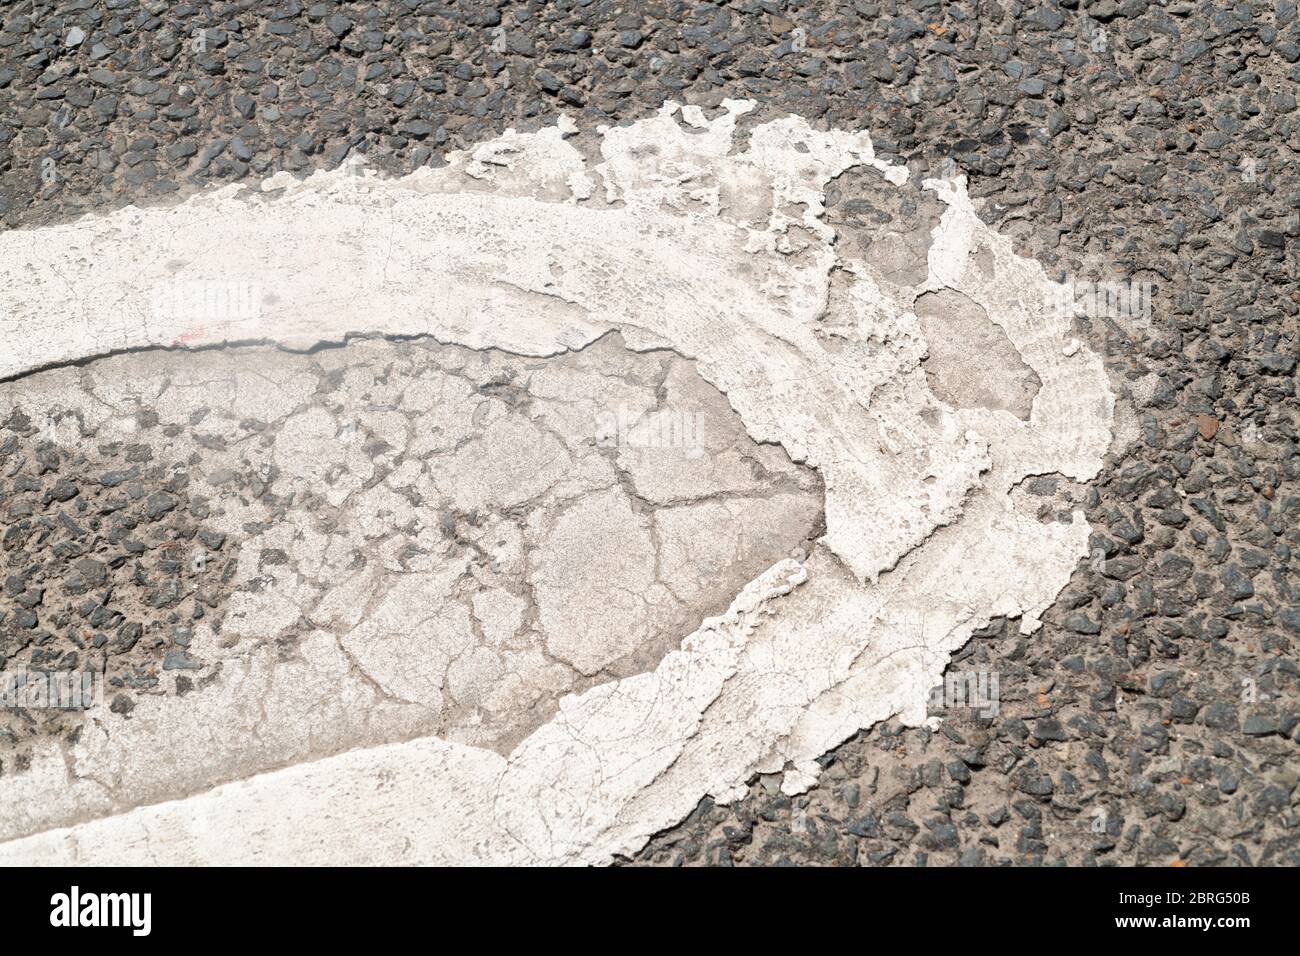 Abstract white road marking paint forming bottom part of O on SLOW. Metaphor road signs, road markings, road network. Stock Photo